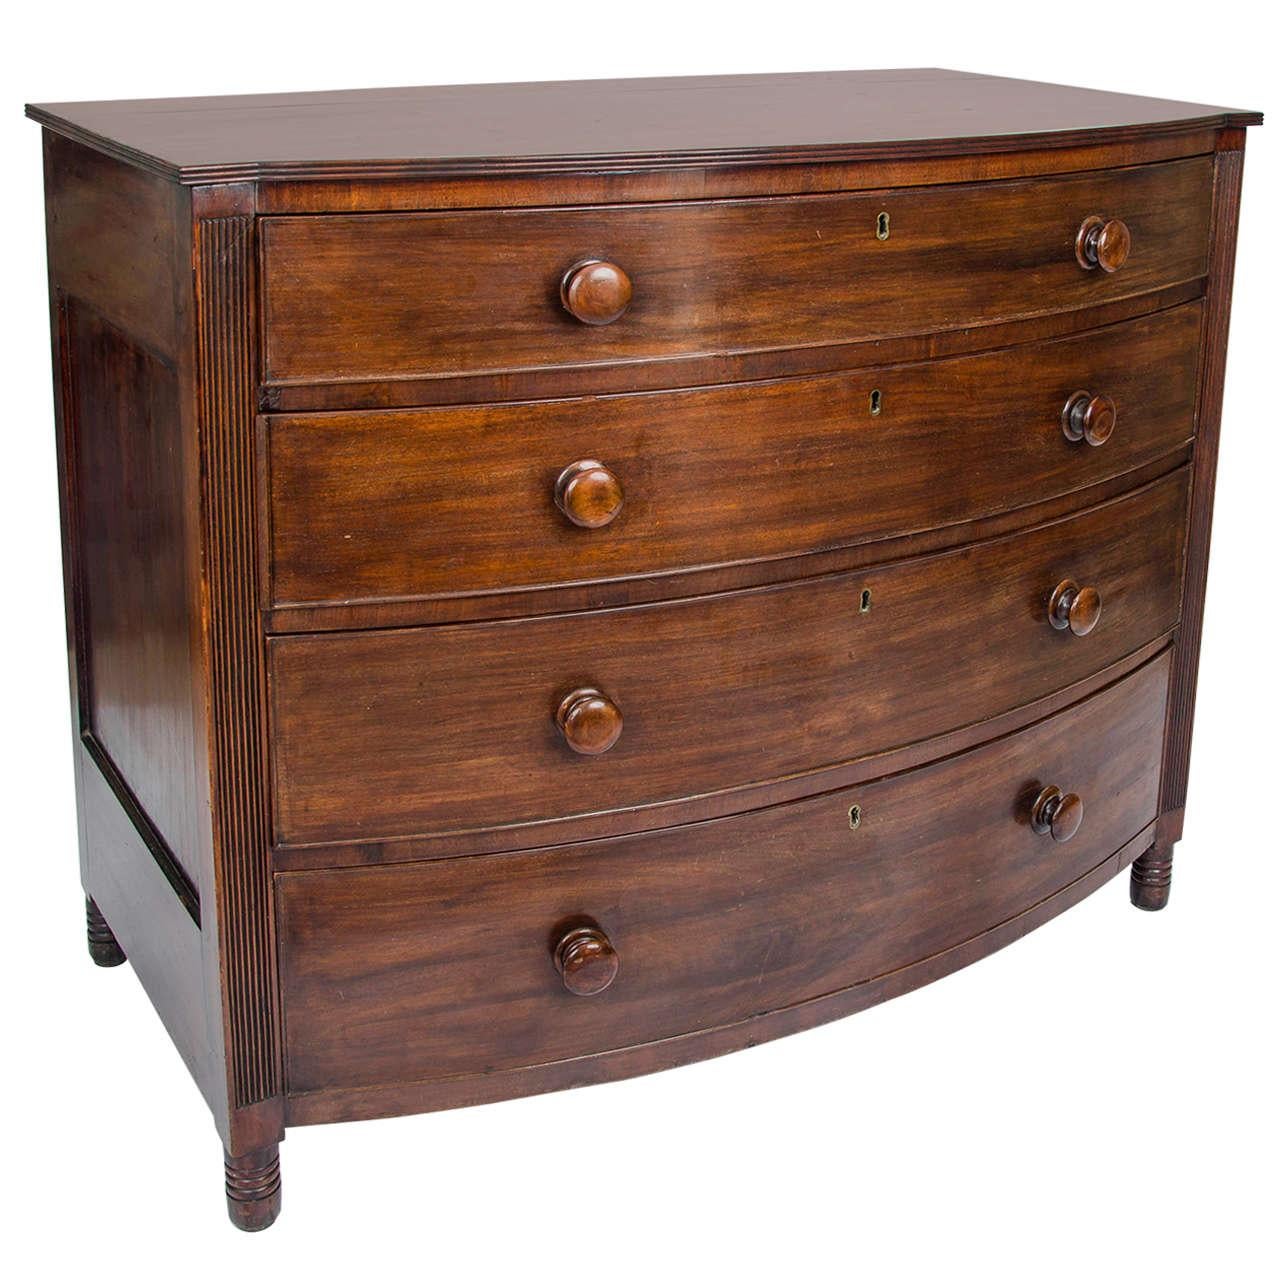 Georgian Regency Period Bow Fronted Chest with Reeded Detail, English circa 1825